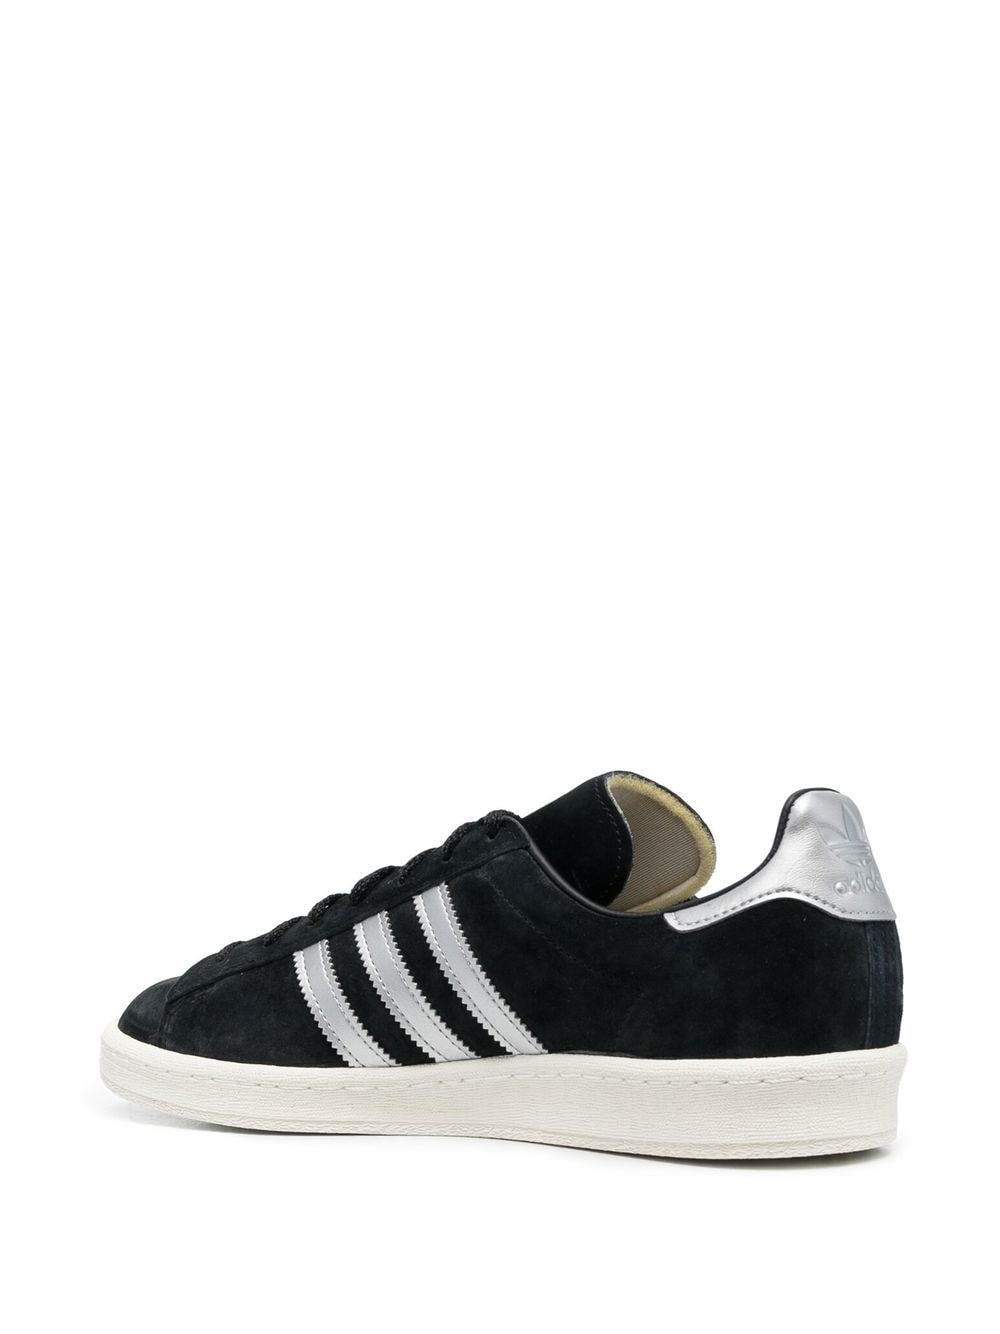 Campus 80s suede sneakers